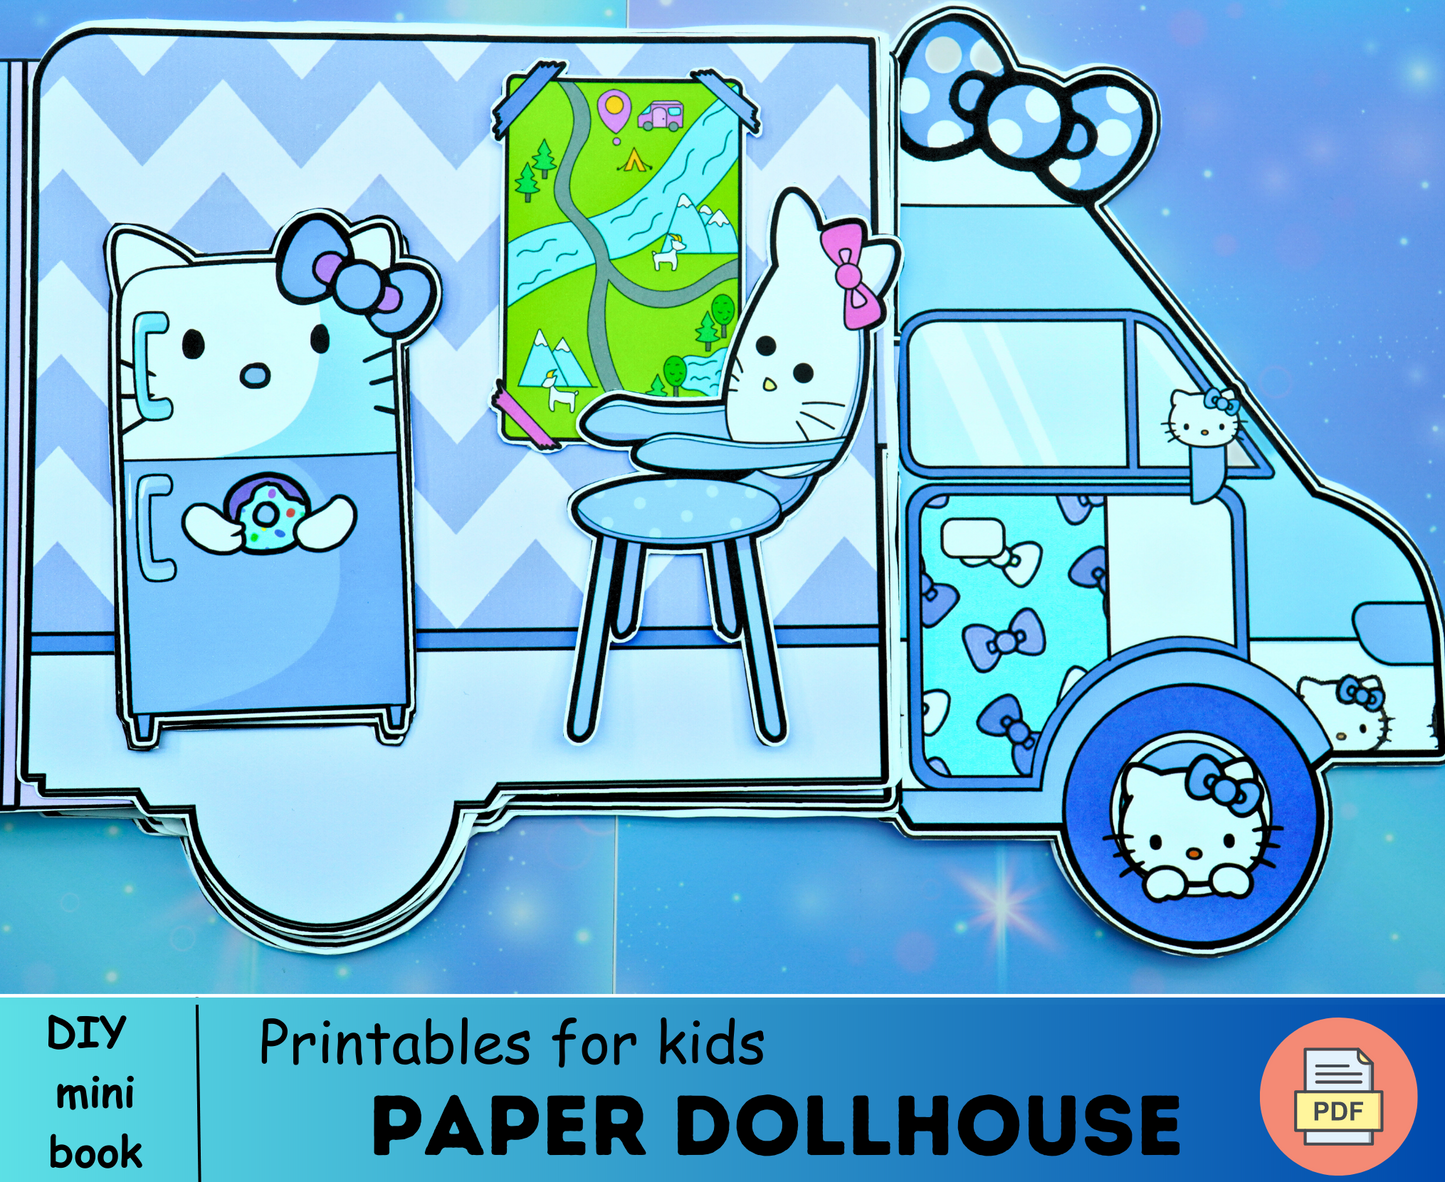 Blueee Kitty Camping Truck Busy Book print for toddler - Printable Paper Dollhouse - Girls Activity Book 🌈 Woa Doll Crafts